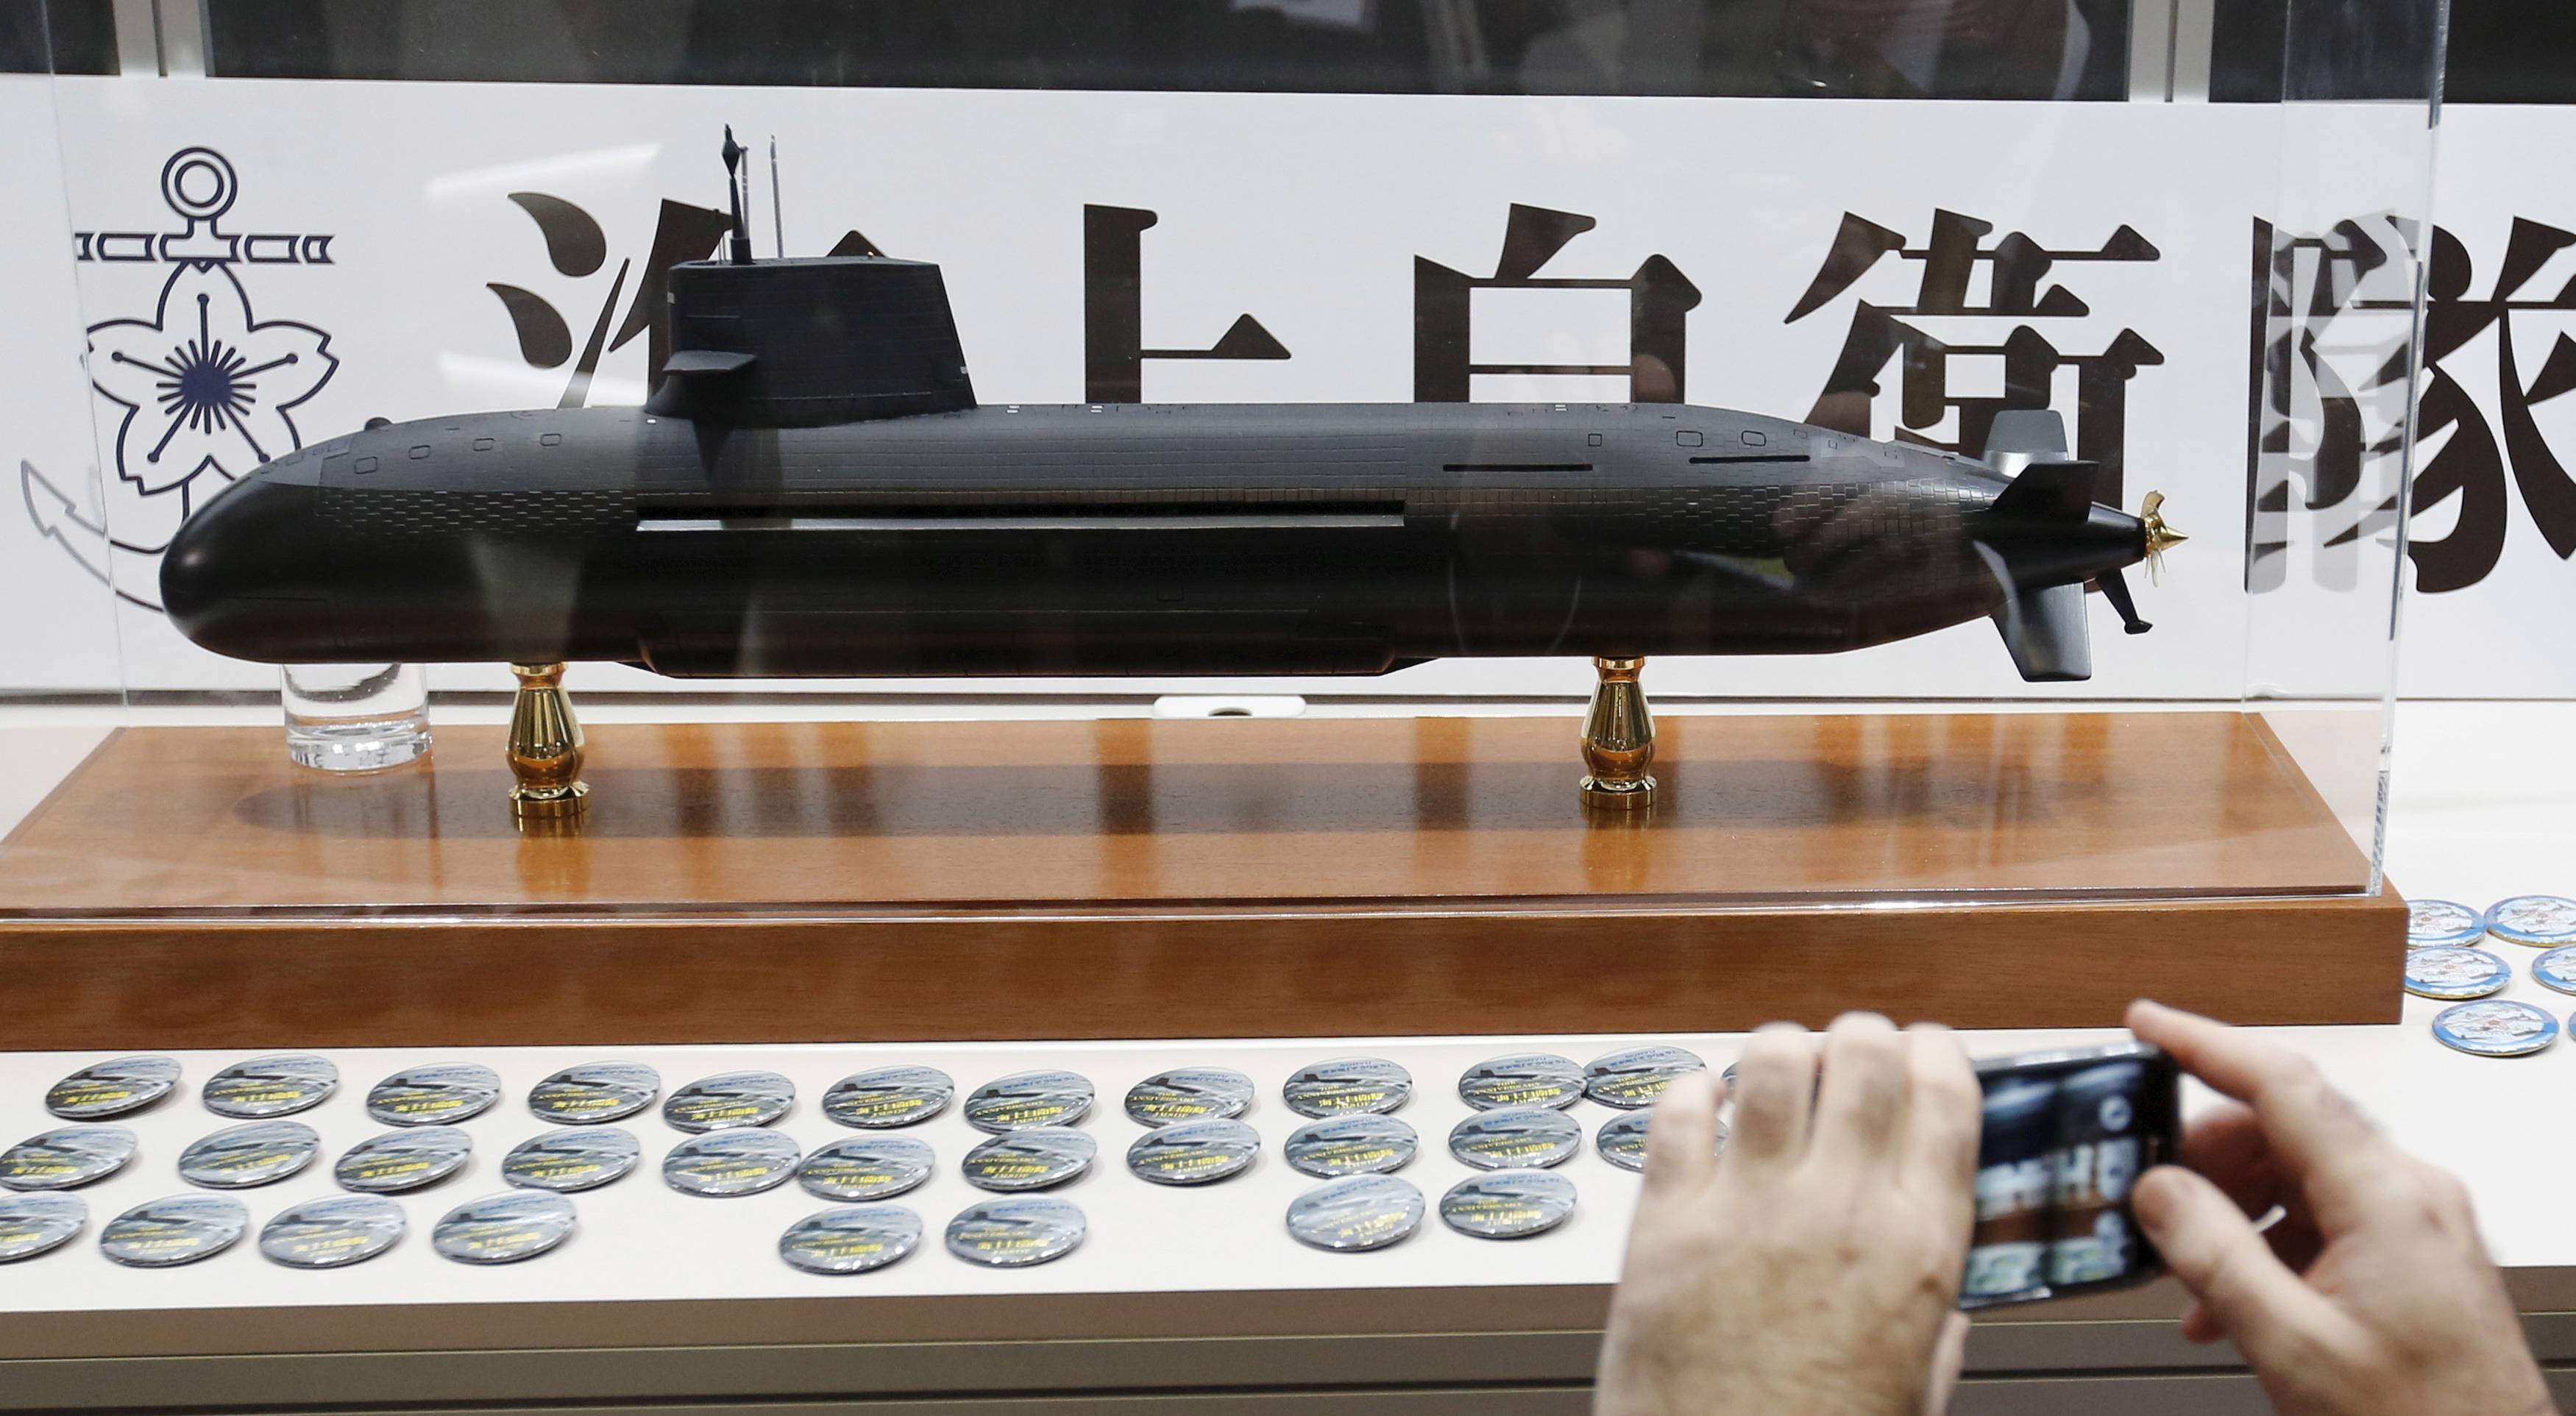 A visitor takes a picture of a model of the Maritime Self-Defense Force's Soryu diesel-electric submarine at the MAST Asia defense exhibition and conference in Yokohama in May 2015. | REUTERS